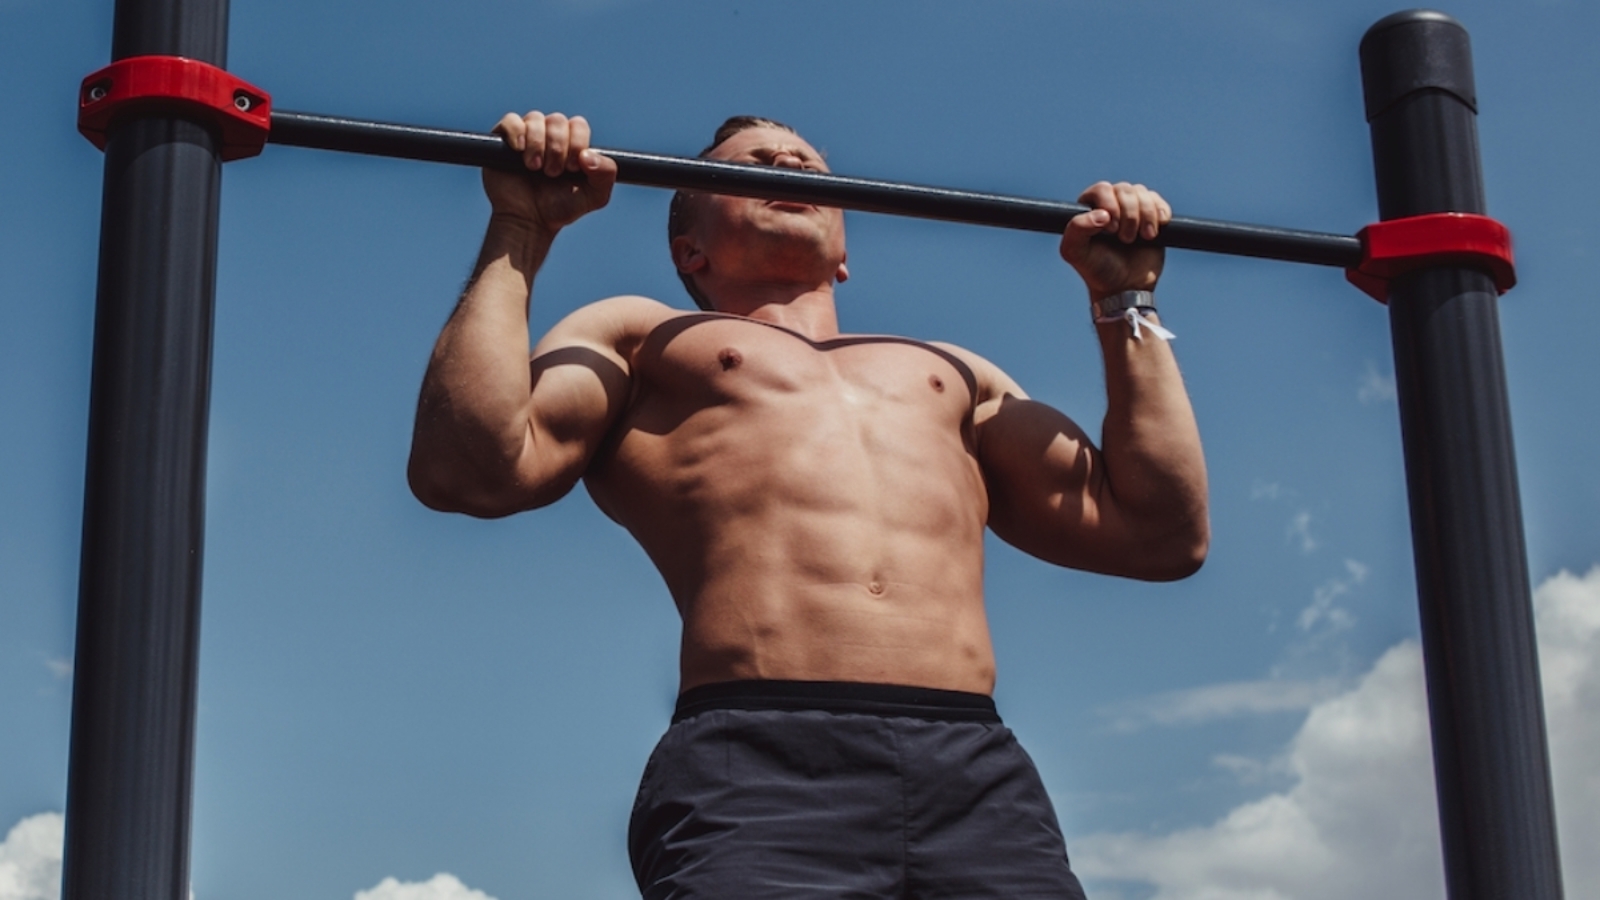 Calisthenics for Lifters: 12 Week Workout to Improve Performance